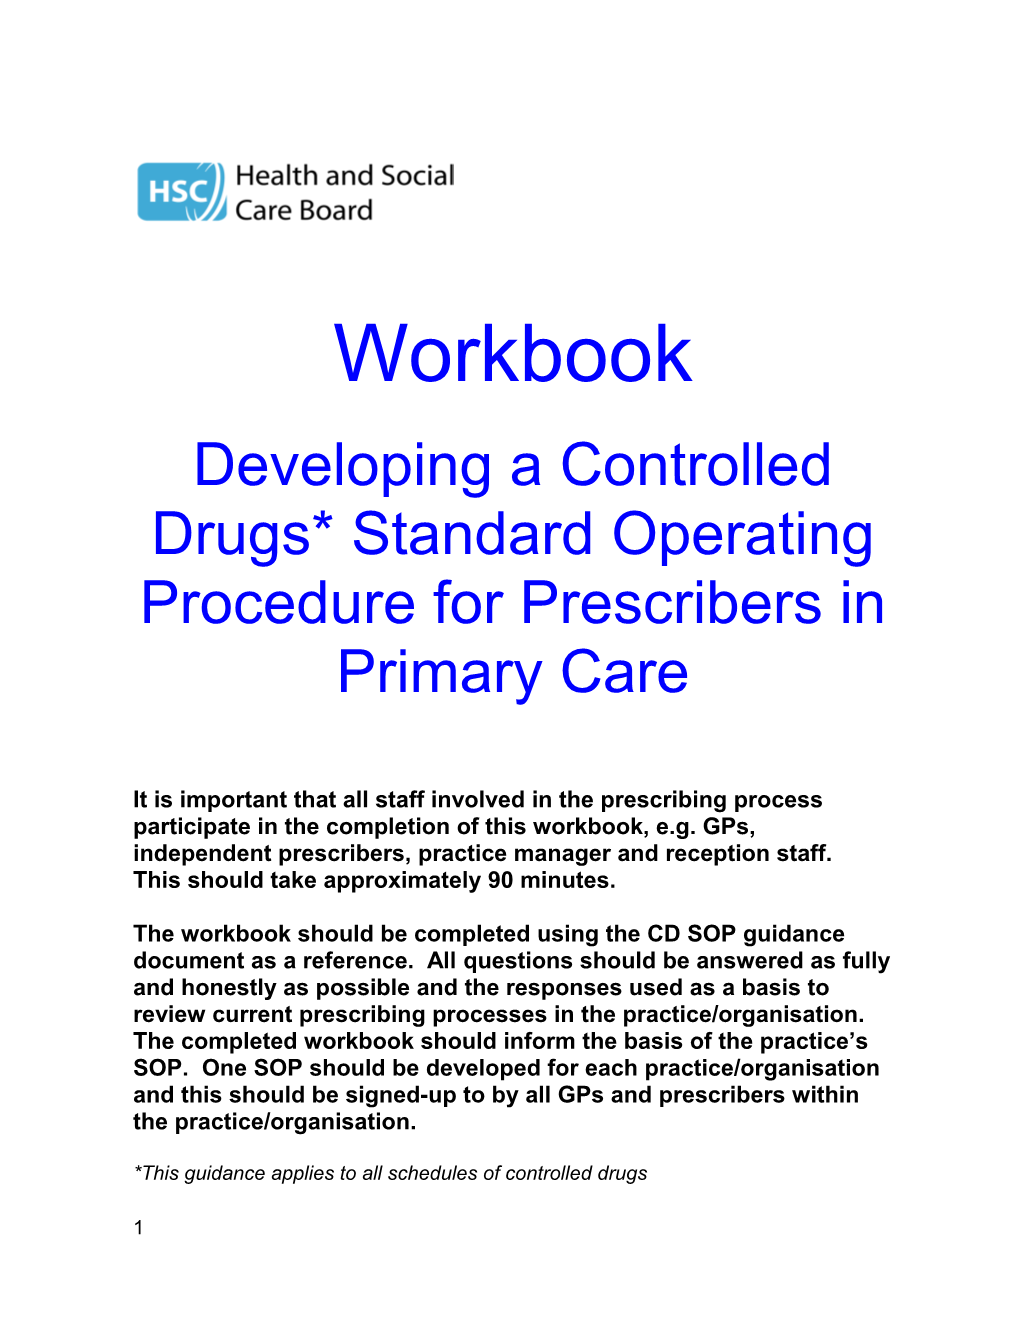 Developing a Controlled Drugs*Standard Operating Procedure for Prescribers in Primary Care